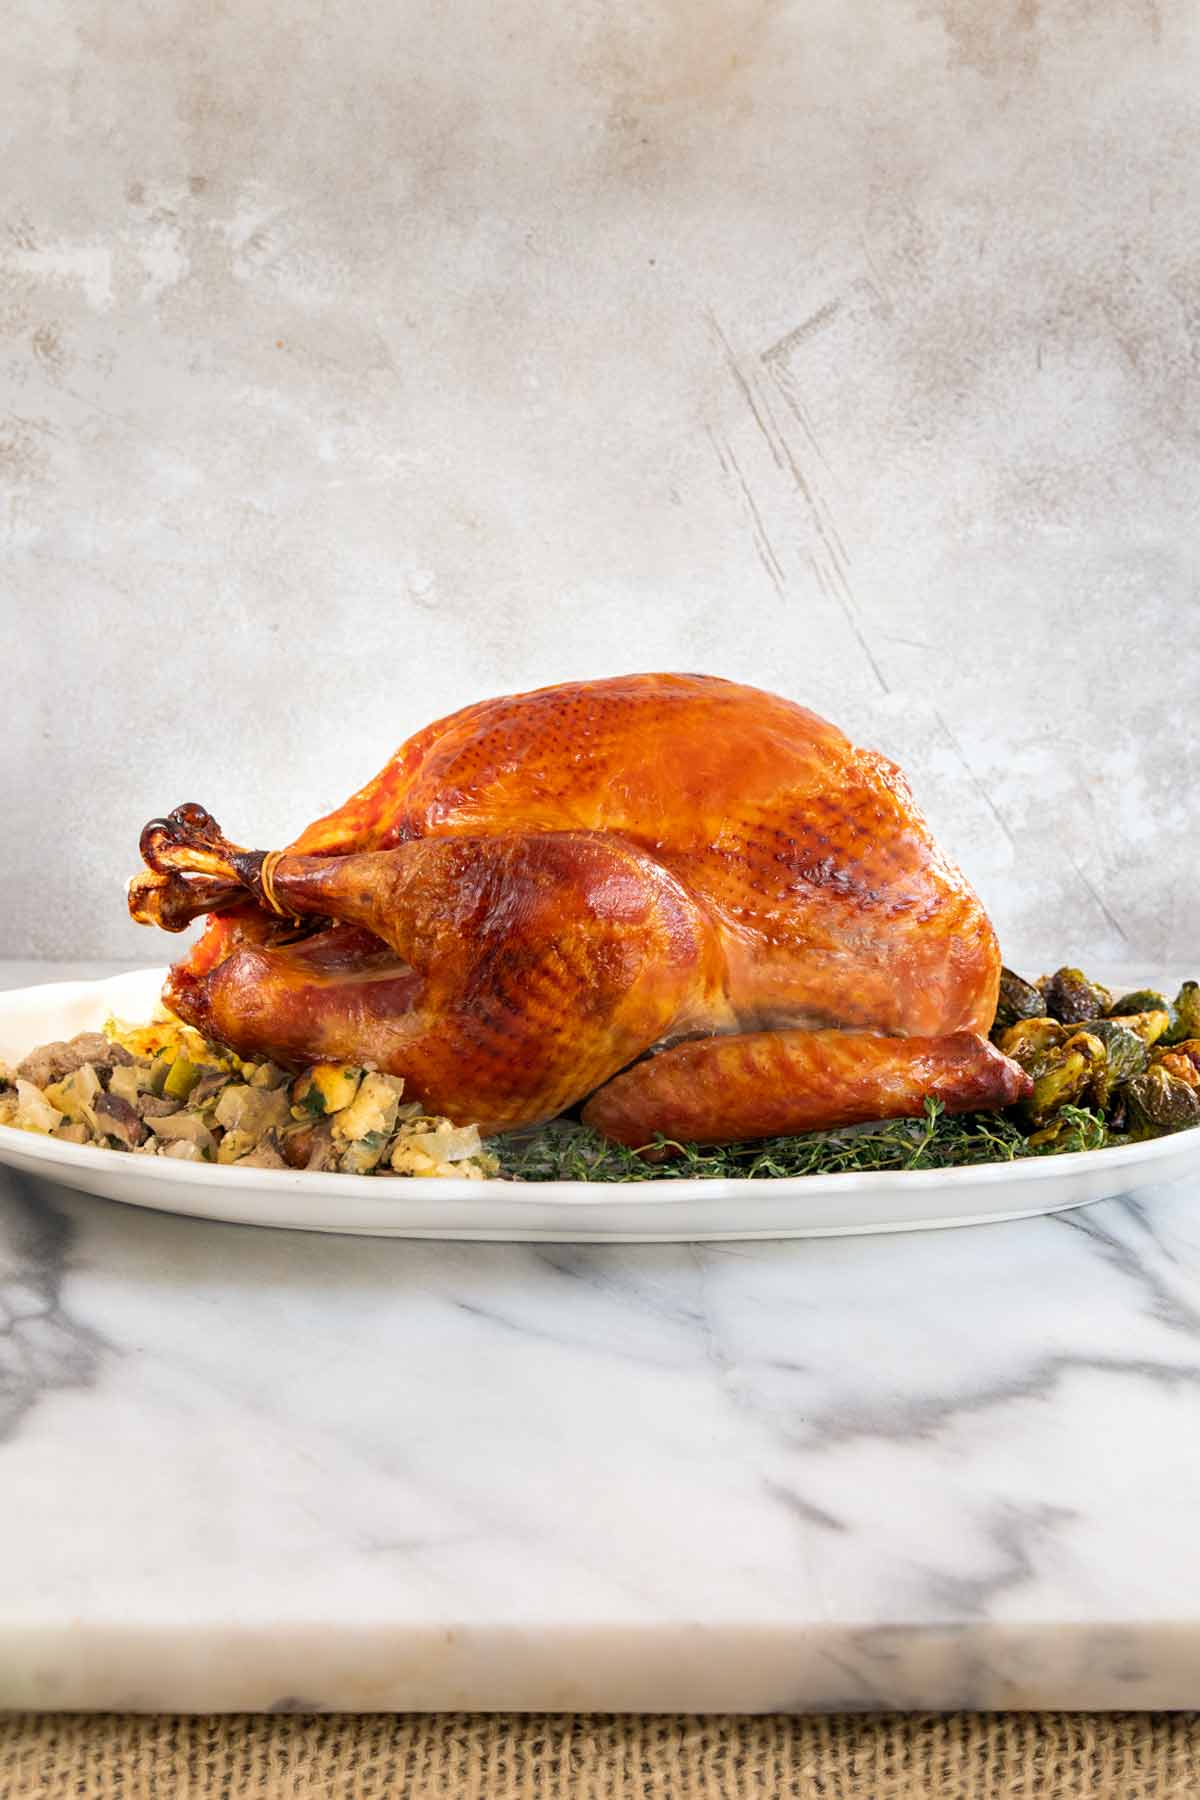 A cooked dry brined turkey on a bed of herbs with stuffing and roasted Brussels sprouts around it.